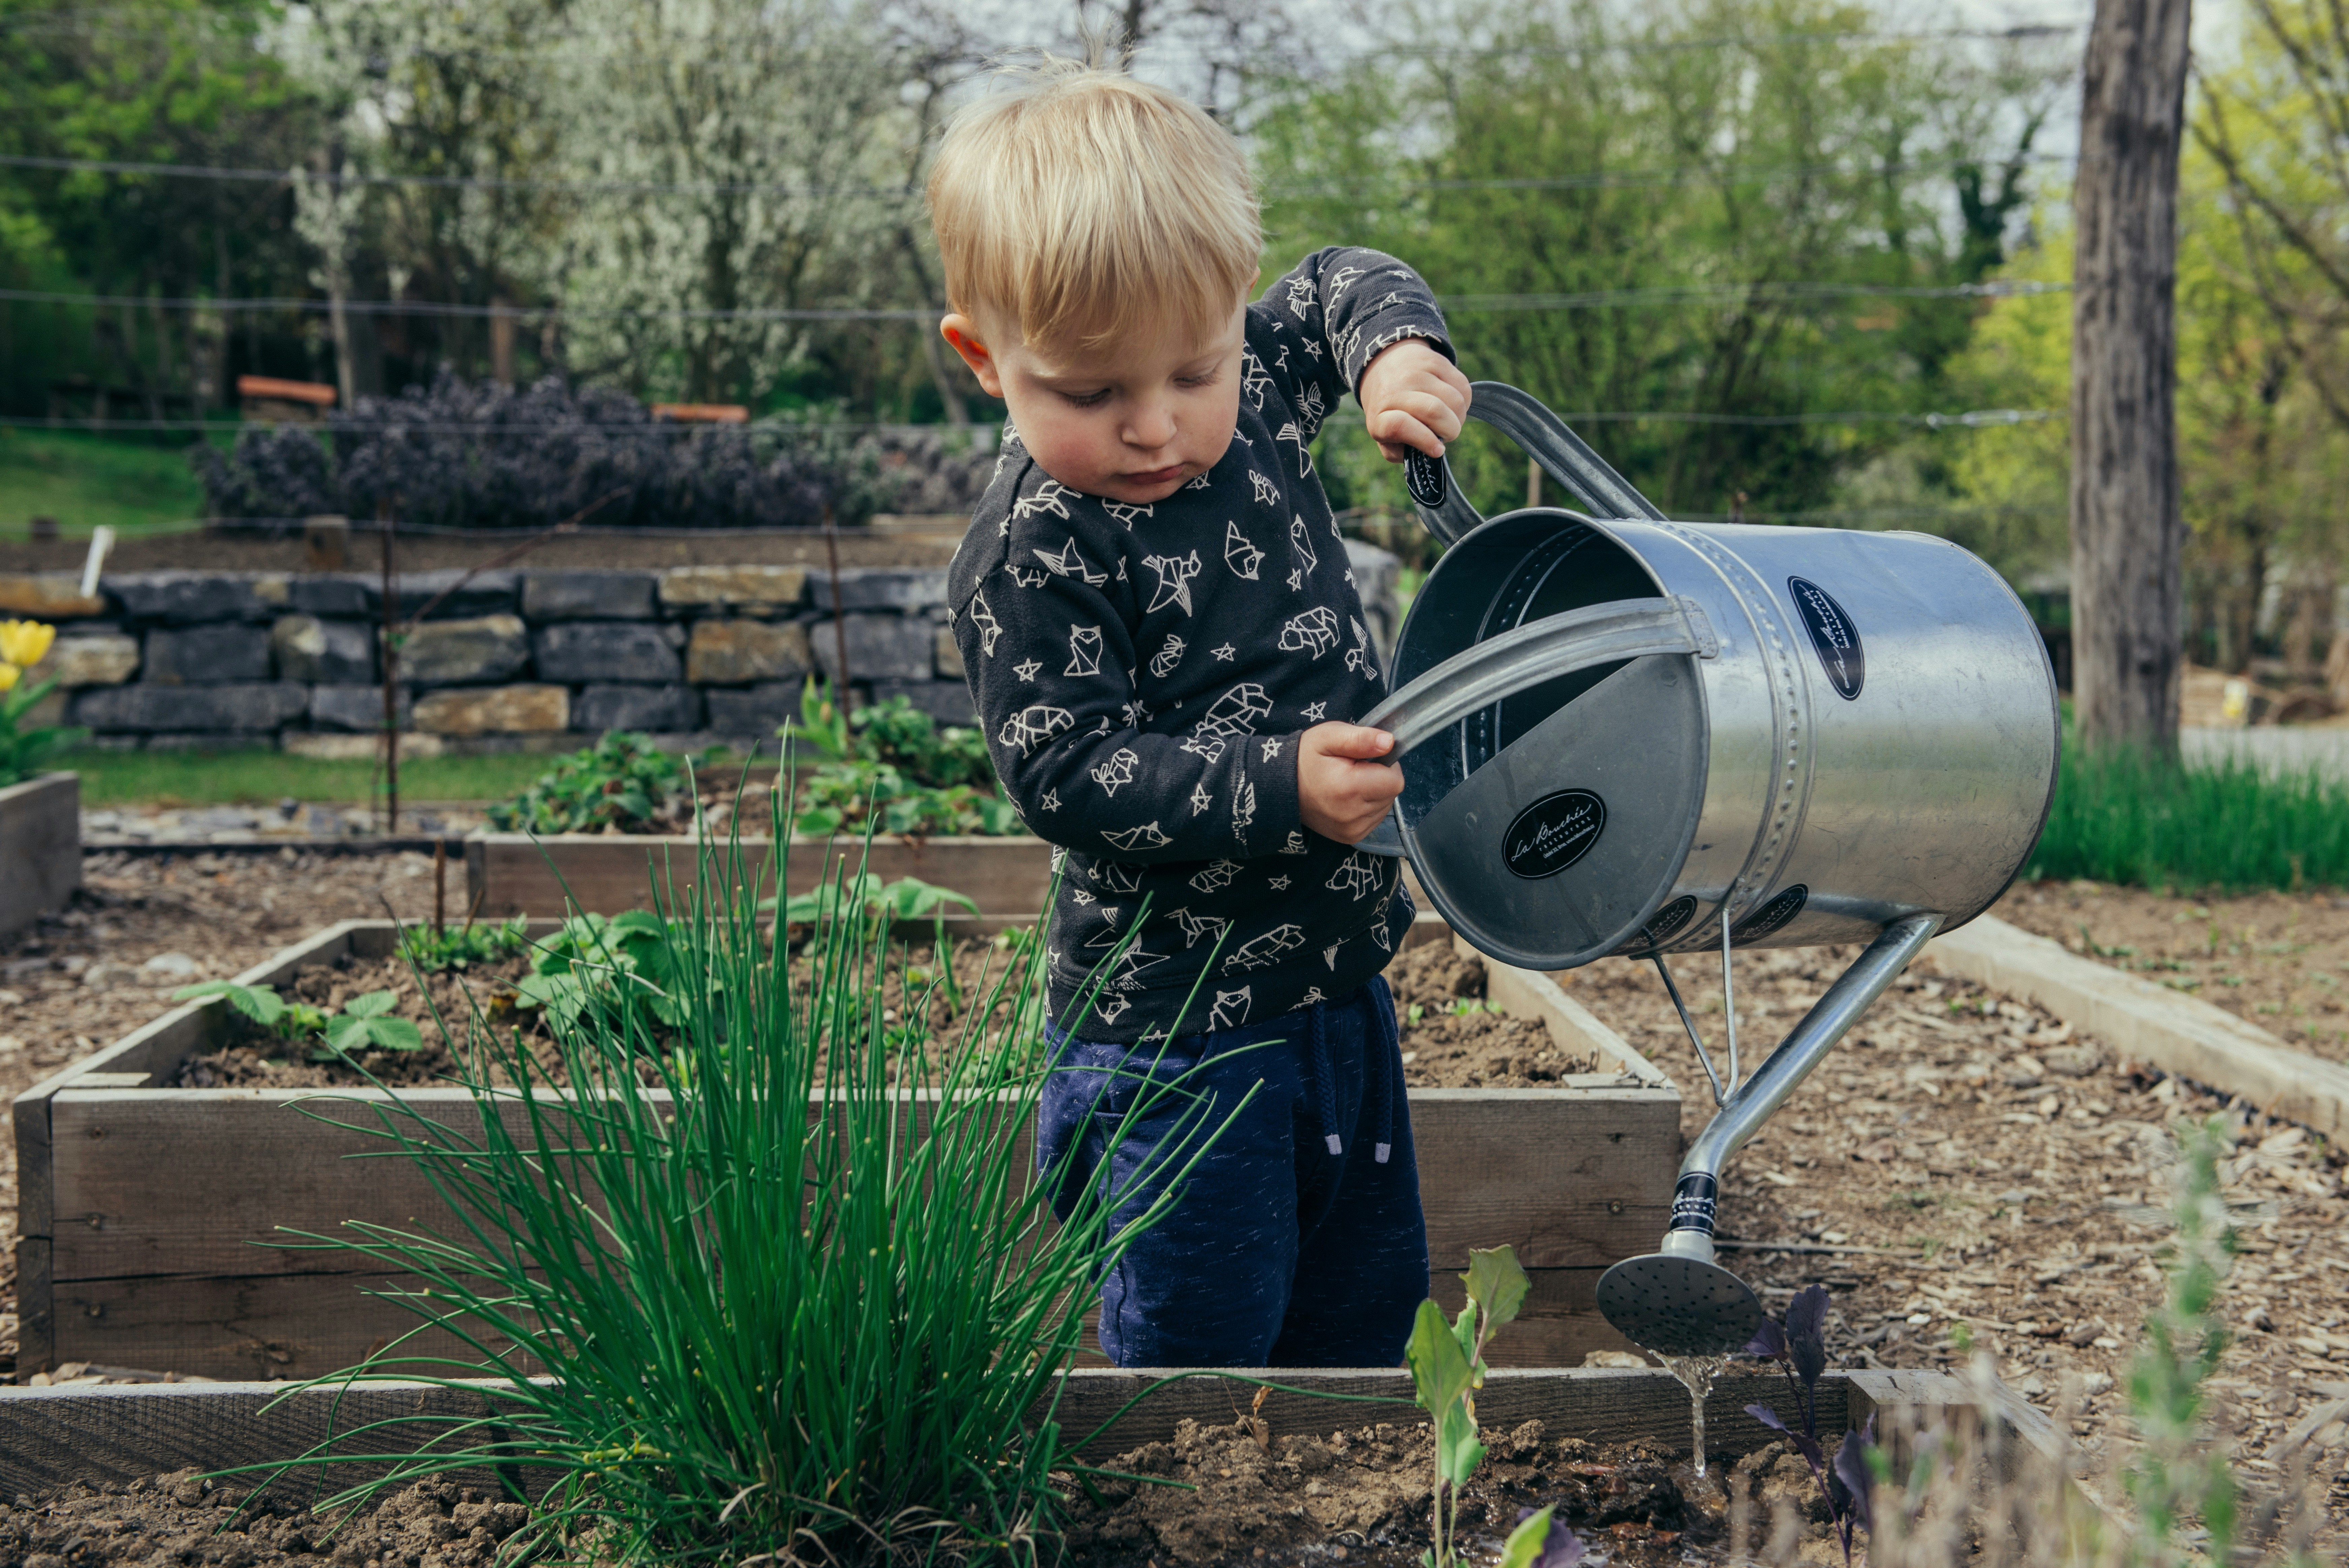 Cultivating Green Hearts: 5 Best Earth Day Activities to Foster Kids’ Environmental Awareness